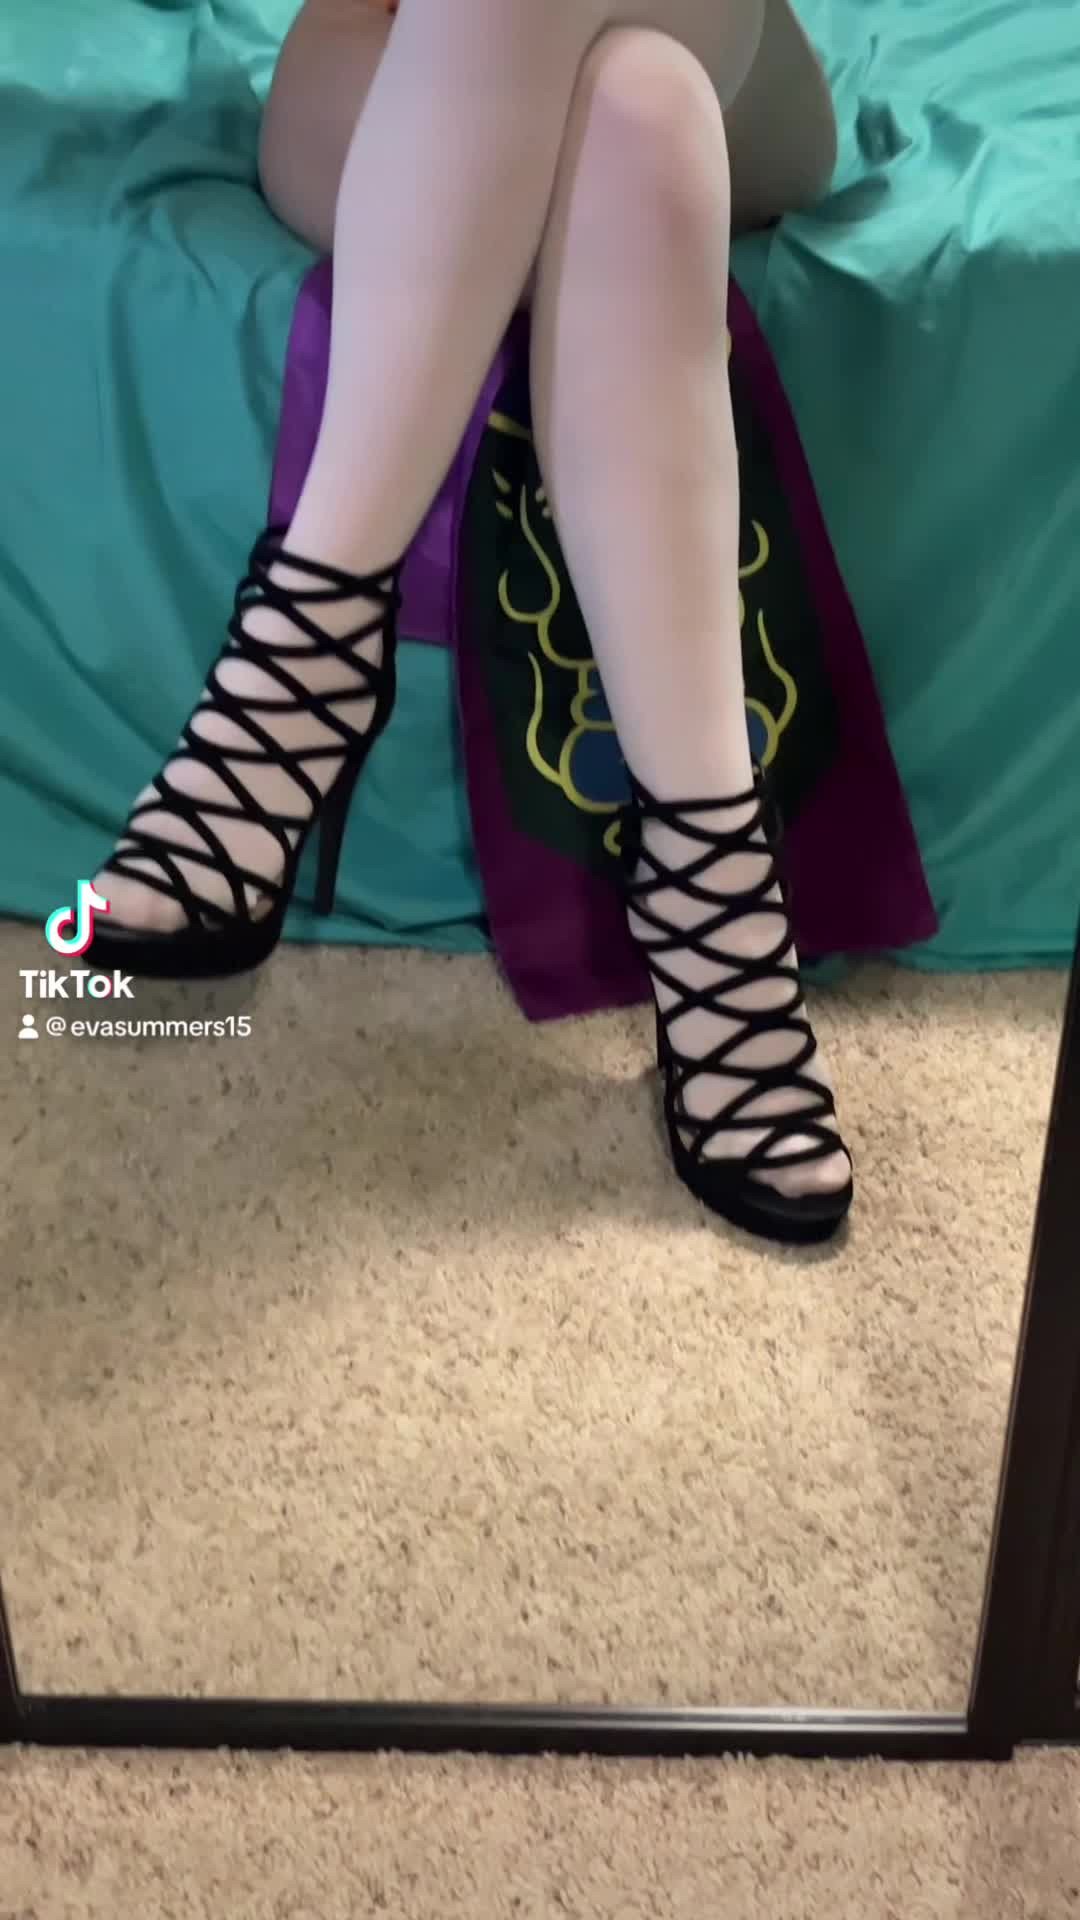 Video by Evasummers with the username @Evasummers, who is a star user,  March 8, 2024 at 2:00 PM. The post is about the topic NSFW TikTok and the text says '#girls #fyp #usa #blonde #thighhighs #petite #cosplay #princesszelda #zelda #highheels #cosplaygirls #princesszeldacosplay #zeldacosplay #cosplayers #meme #adultcontent #adulthumor #contentcreator #foryou #onlyfans #onlyfansgirls #foryou #midriff #belly..'